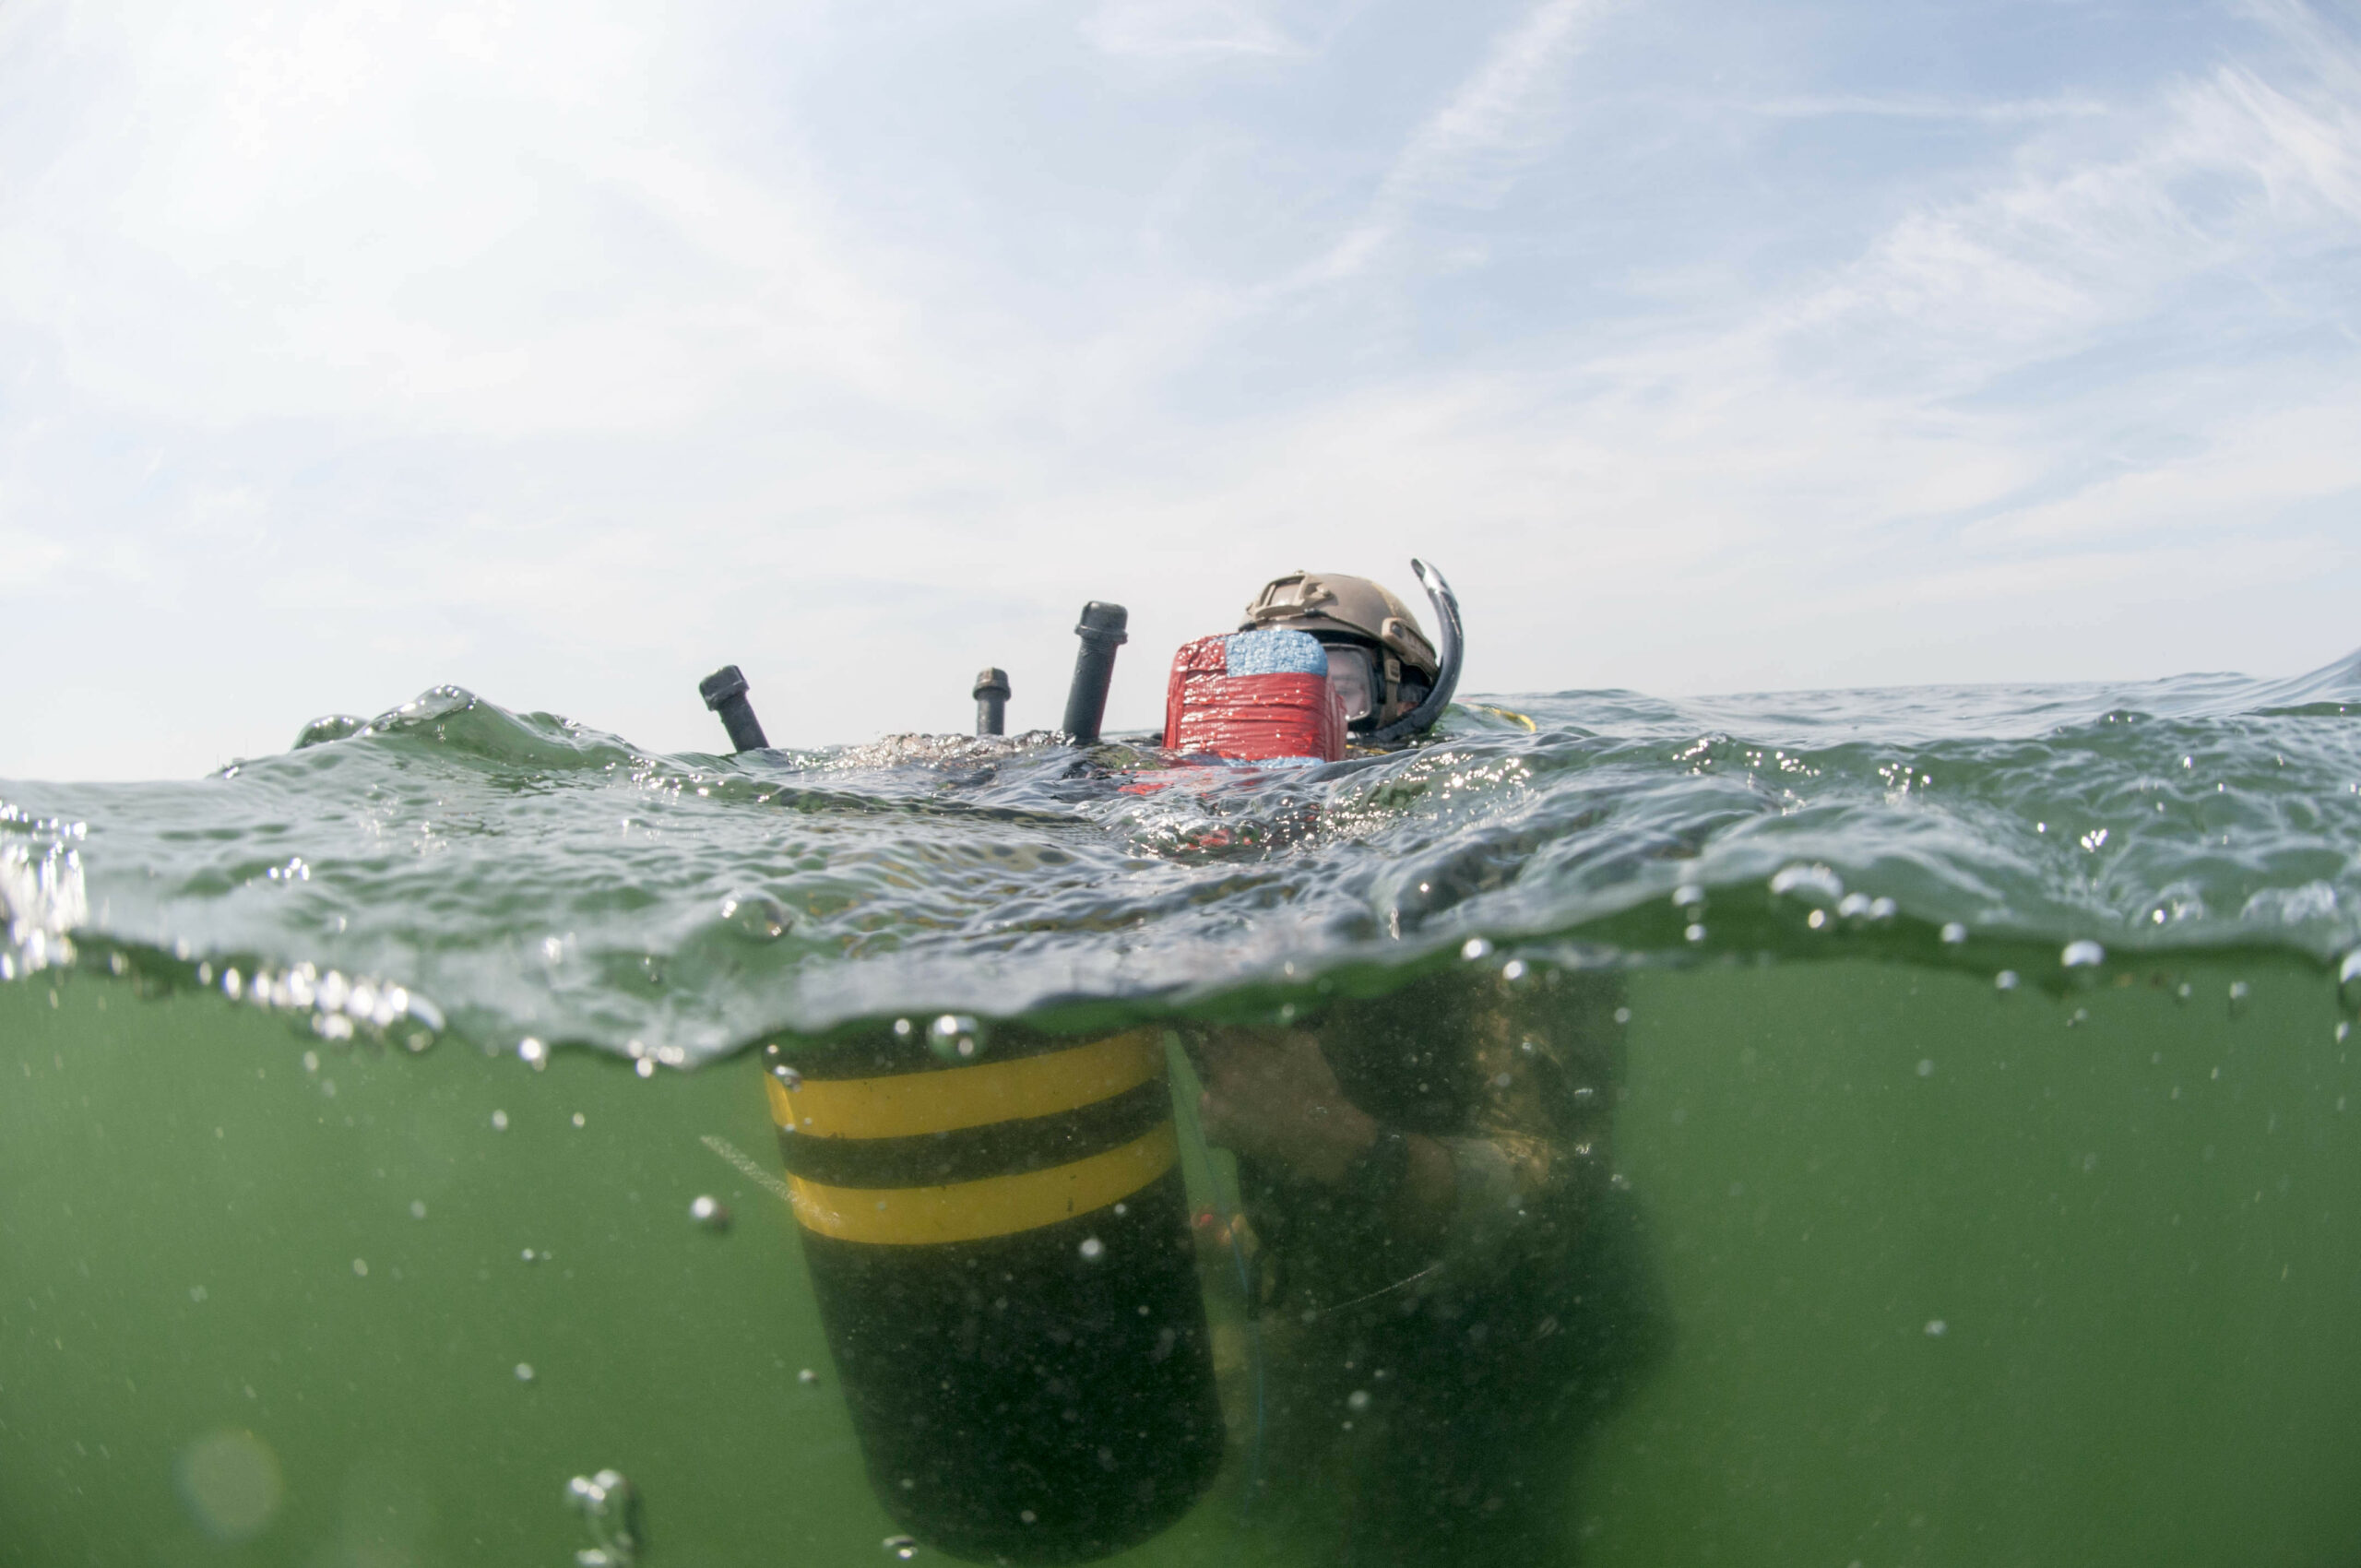 190820-N-AP176-0392 VIRGINIA BEACH, Va. (Aug. 20, 2019) An explosive ordnance disposal (EOD) technician assigned to EOD Mobile Unit (EODMU) 2 prepares inert training demolition during mine countermeasure training. EODMU 2 provides credible, combat-ready EOD forces capable of deploying anywhere, any time in support of national interests. (U.S. Navy photo by Chief Mass Communication Specialist Jeff Atherton/Released)